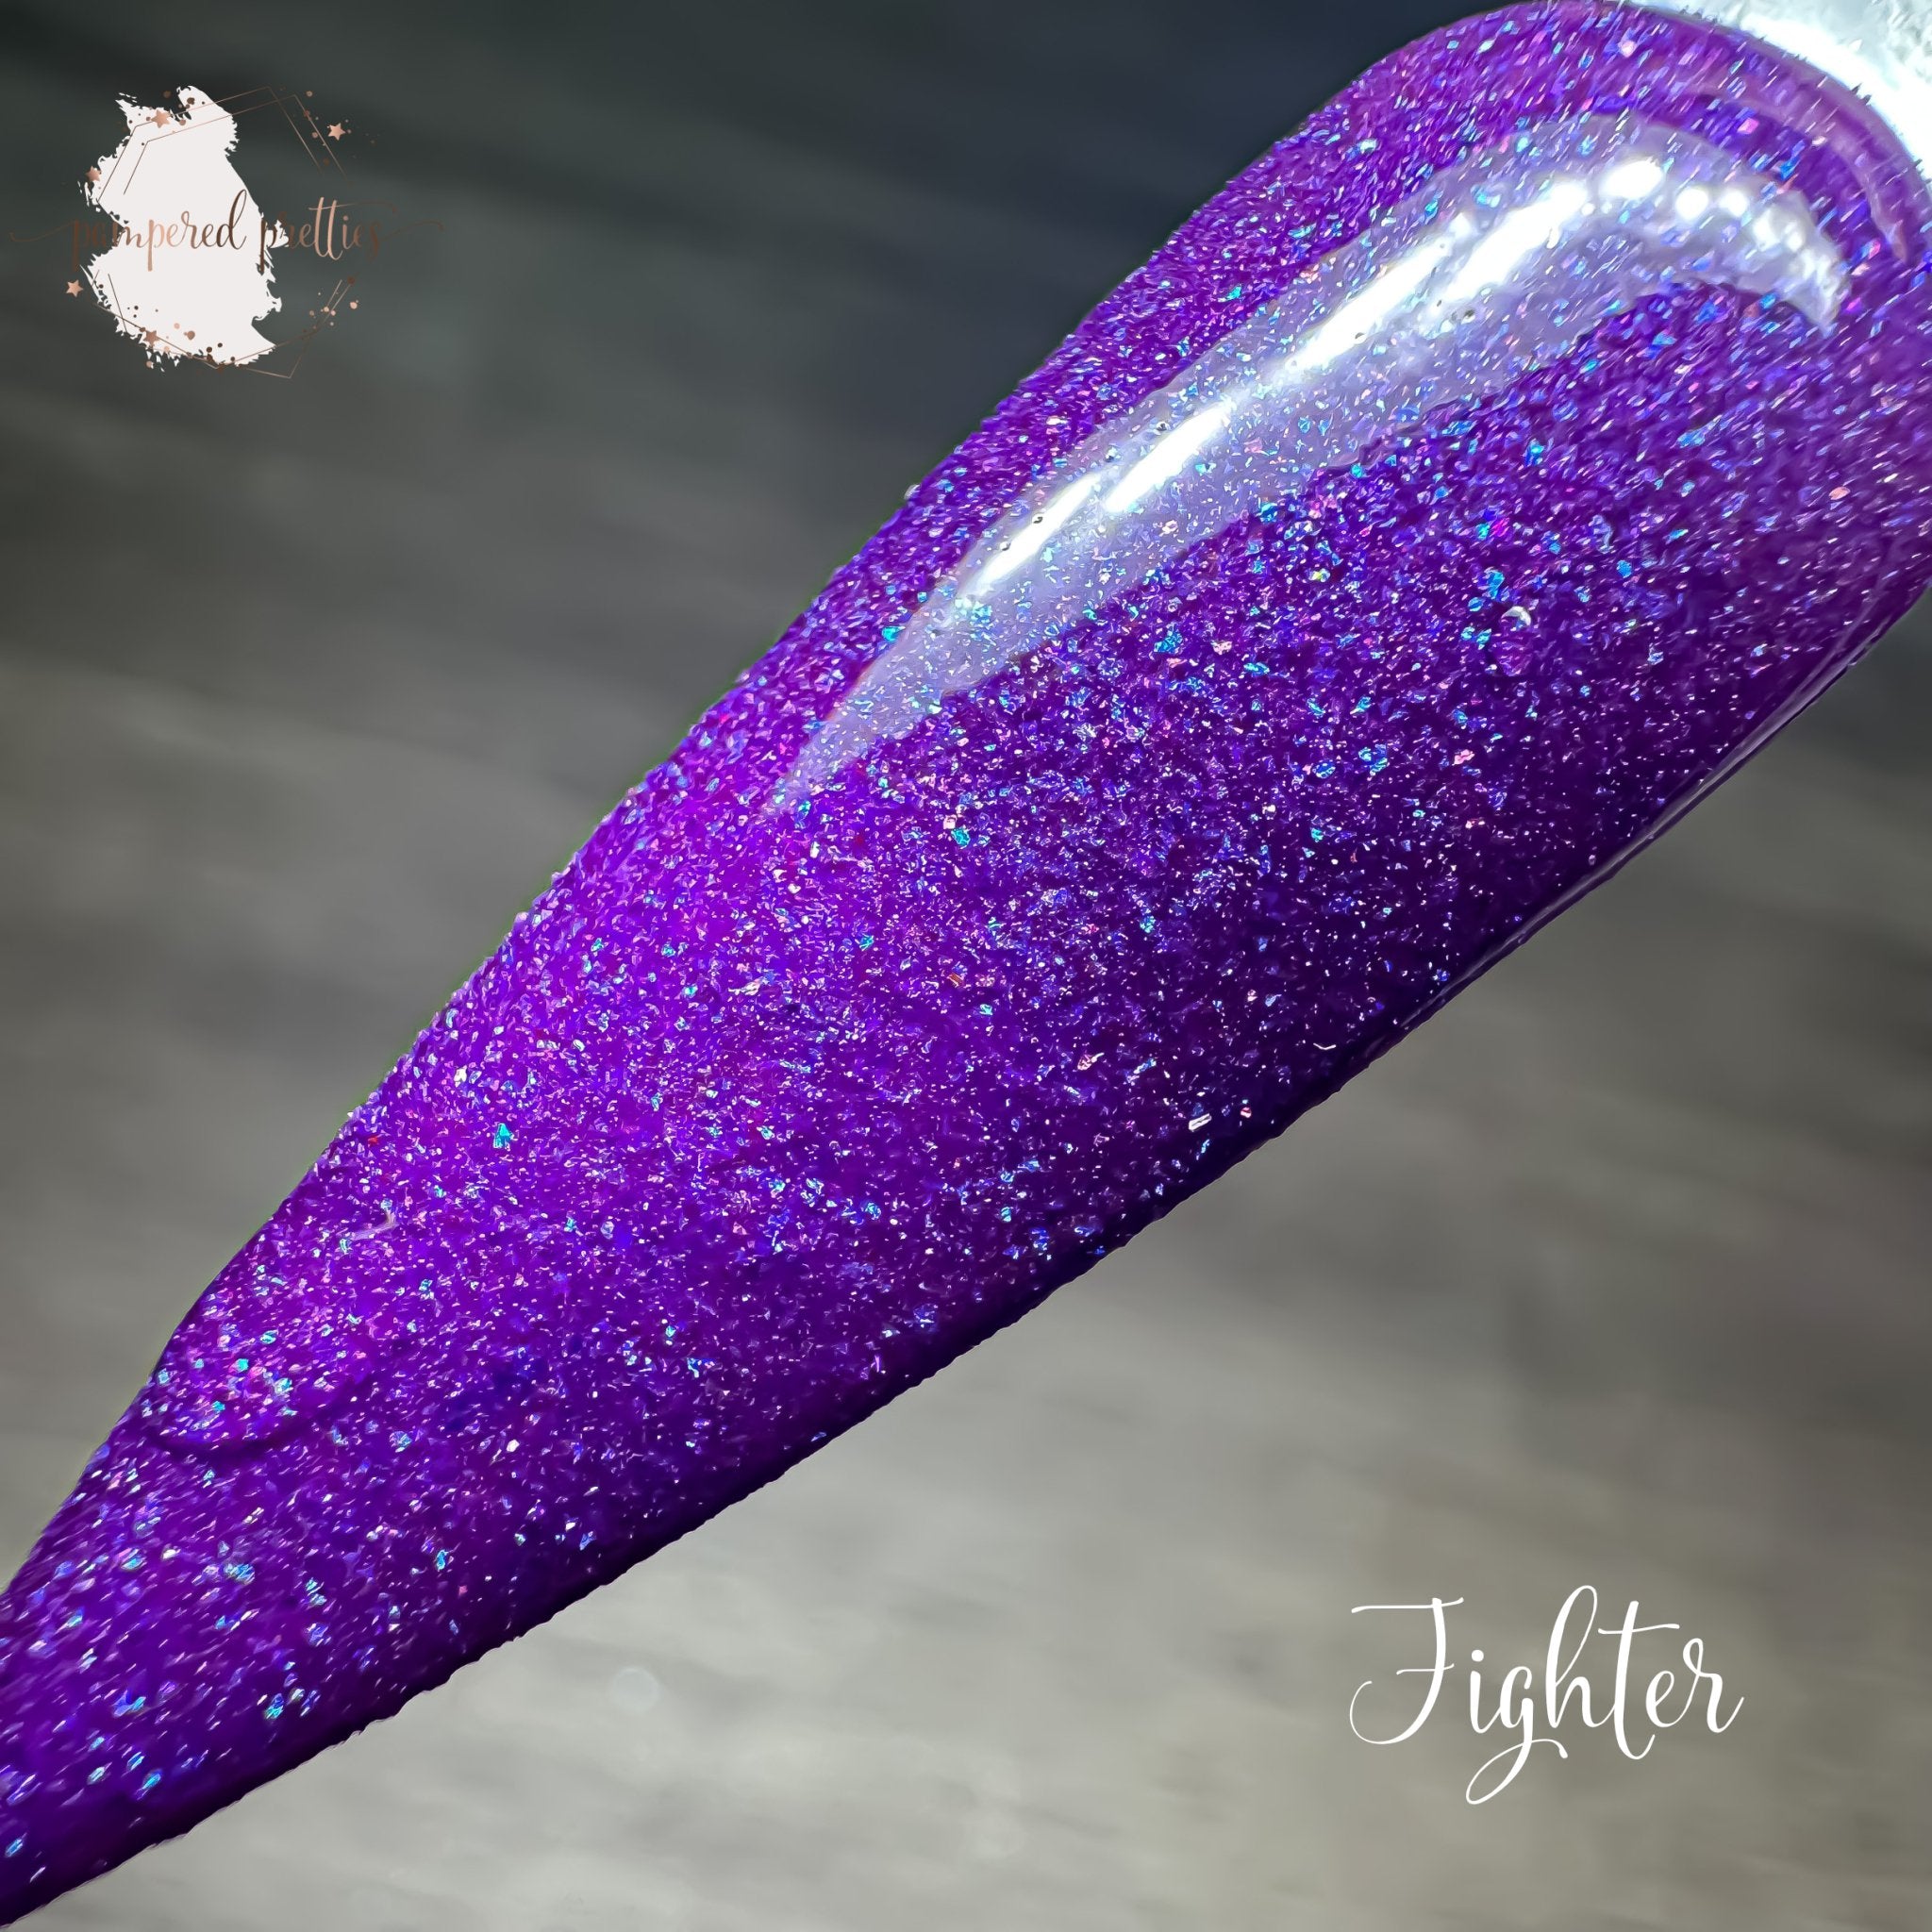 Fighter (Domestic Violence Awareness) - Pampered Pretties